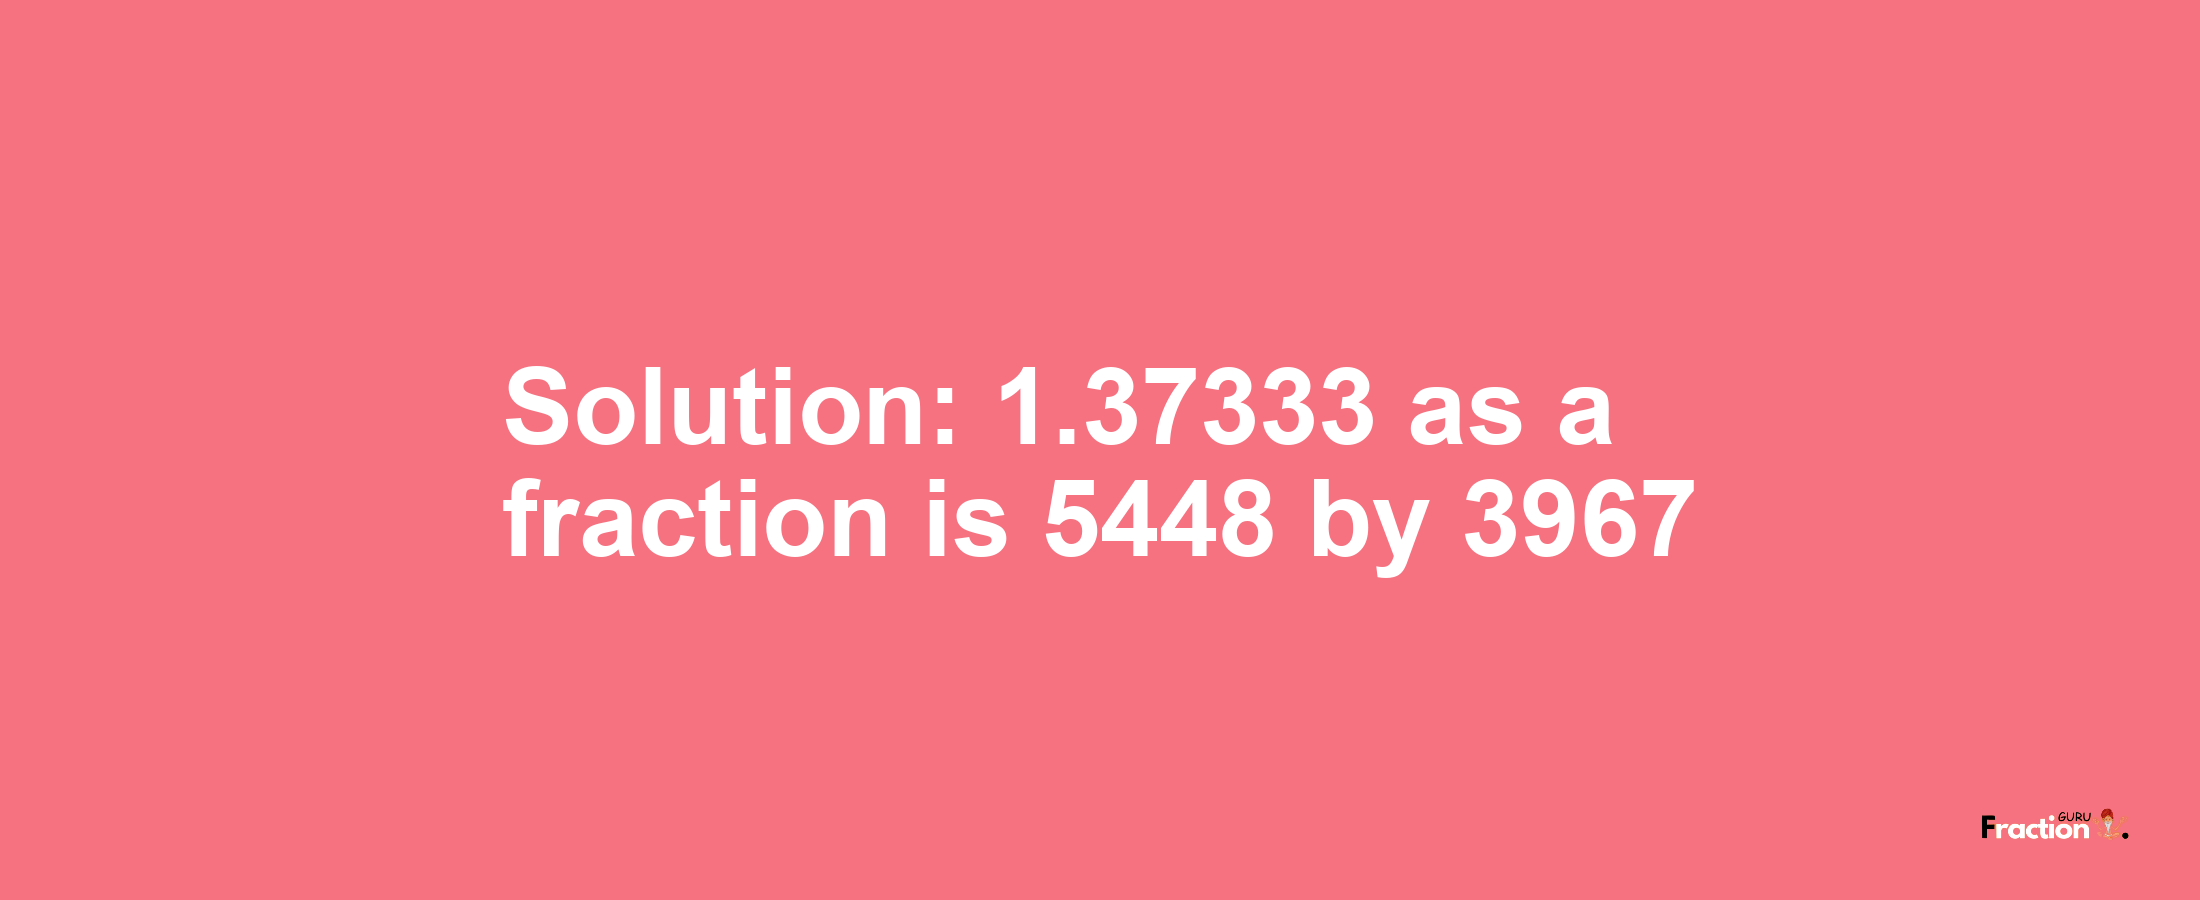 Solution:1.37333 as a fraction is 5448/3967